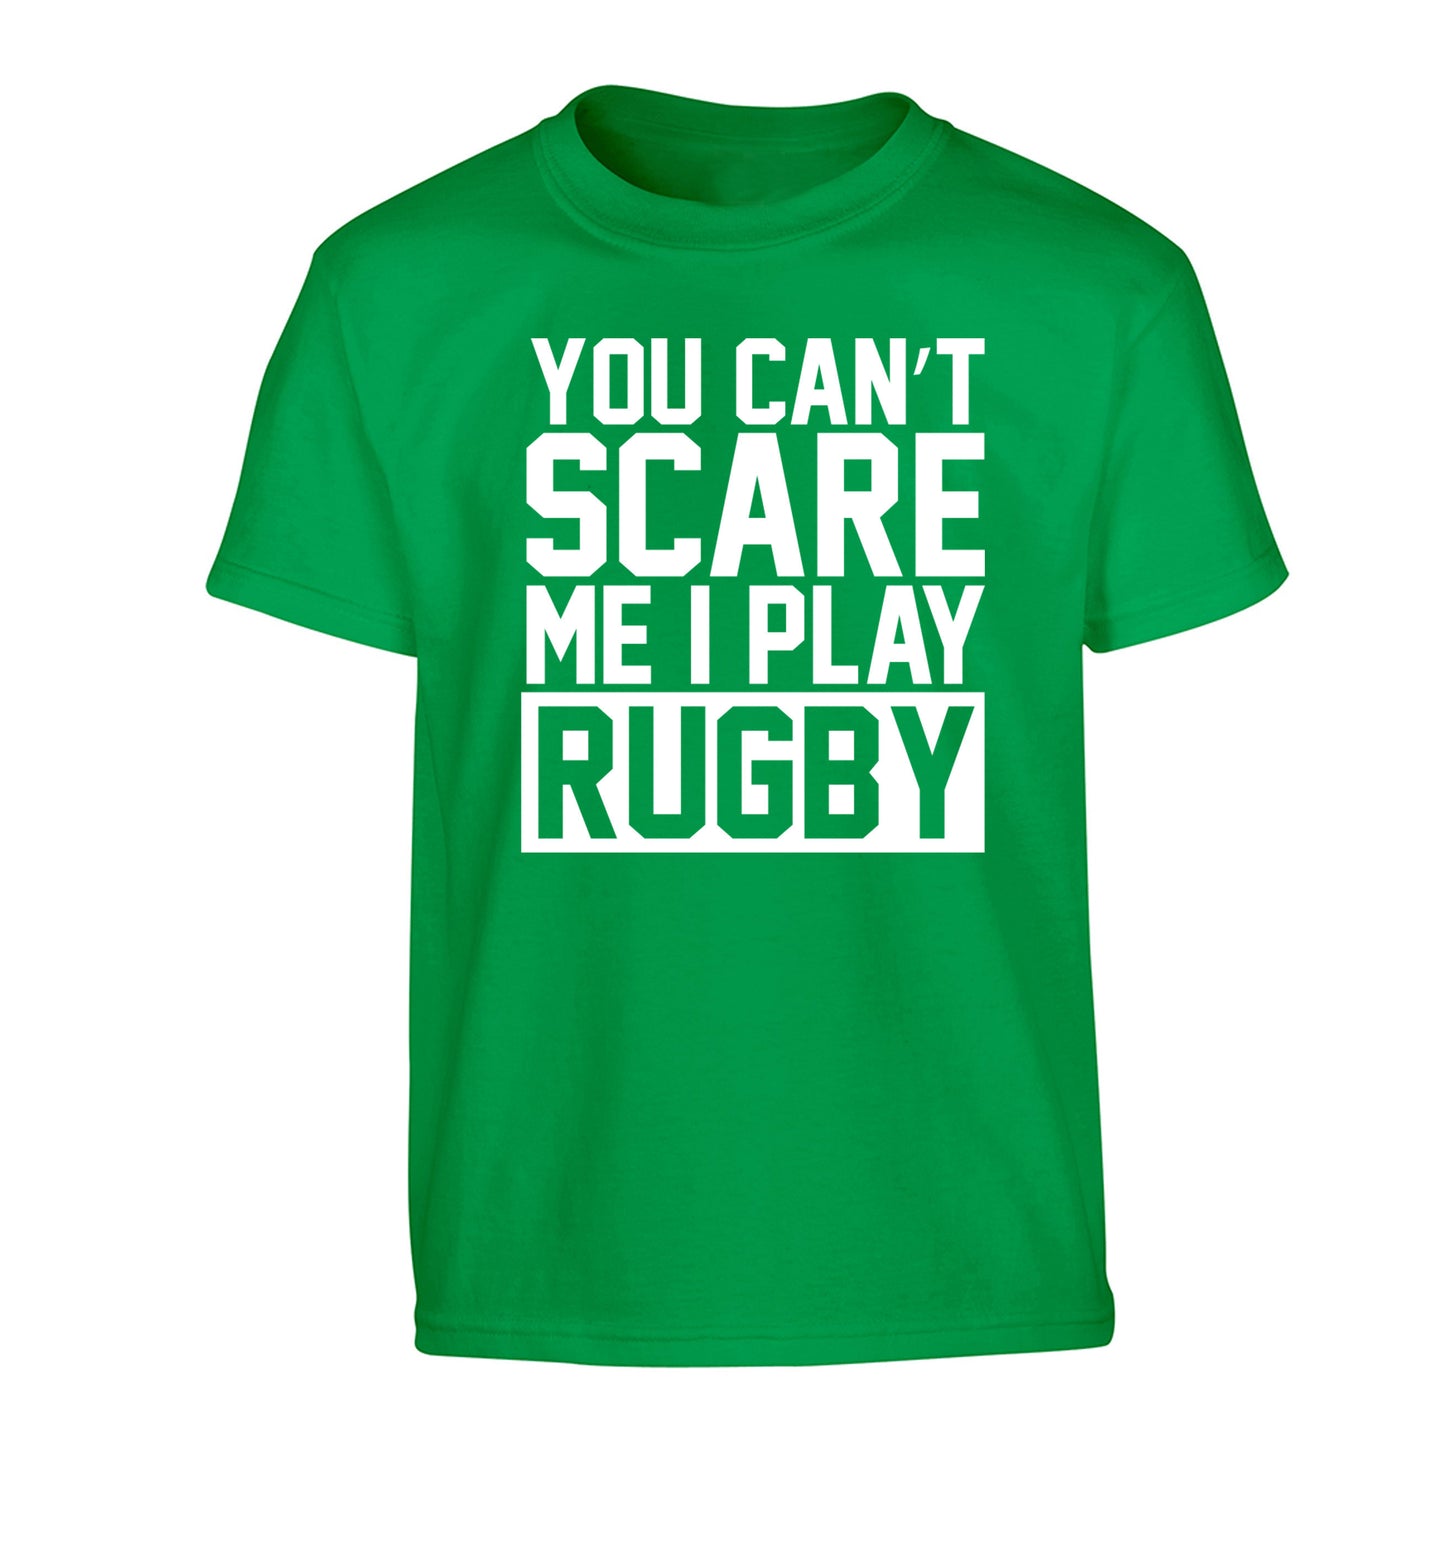 You can't scare me I play rugby Children's green Tshirt 12-14 Years